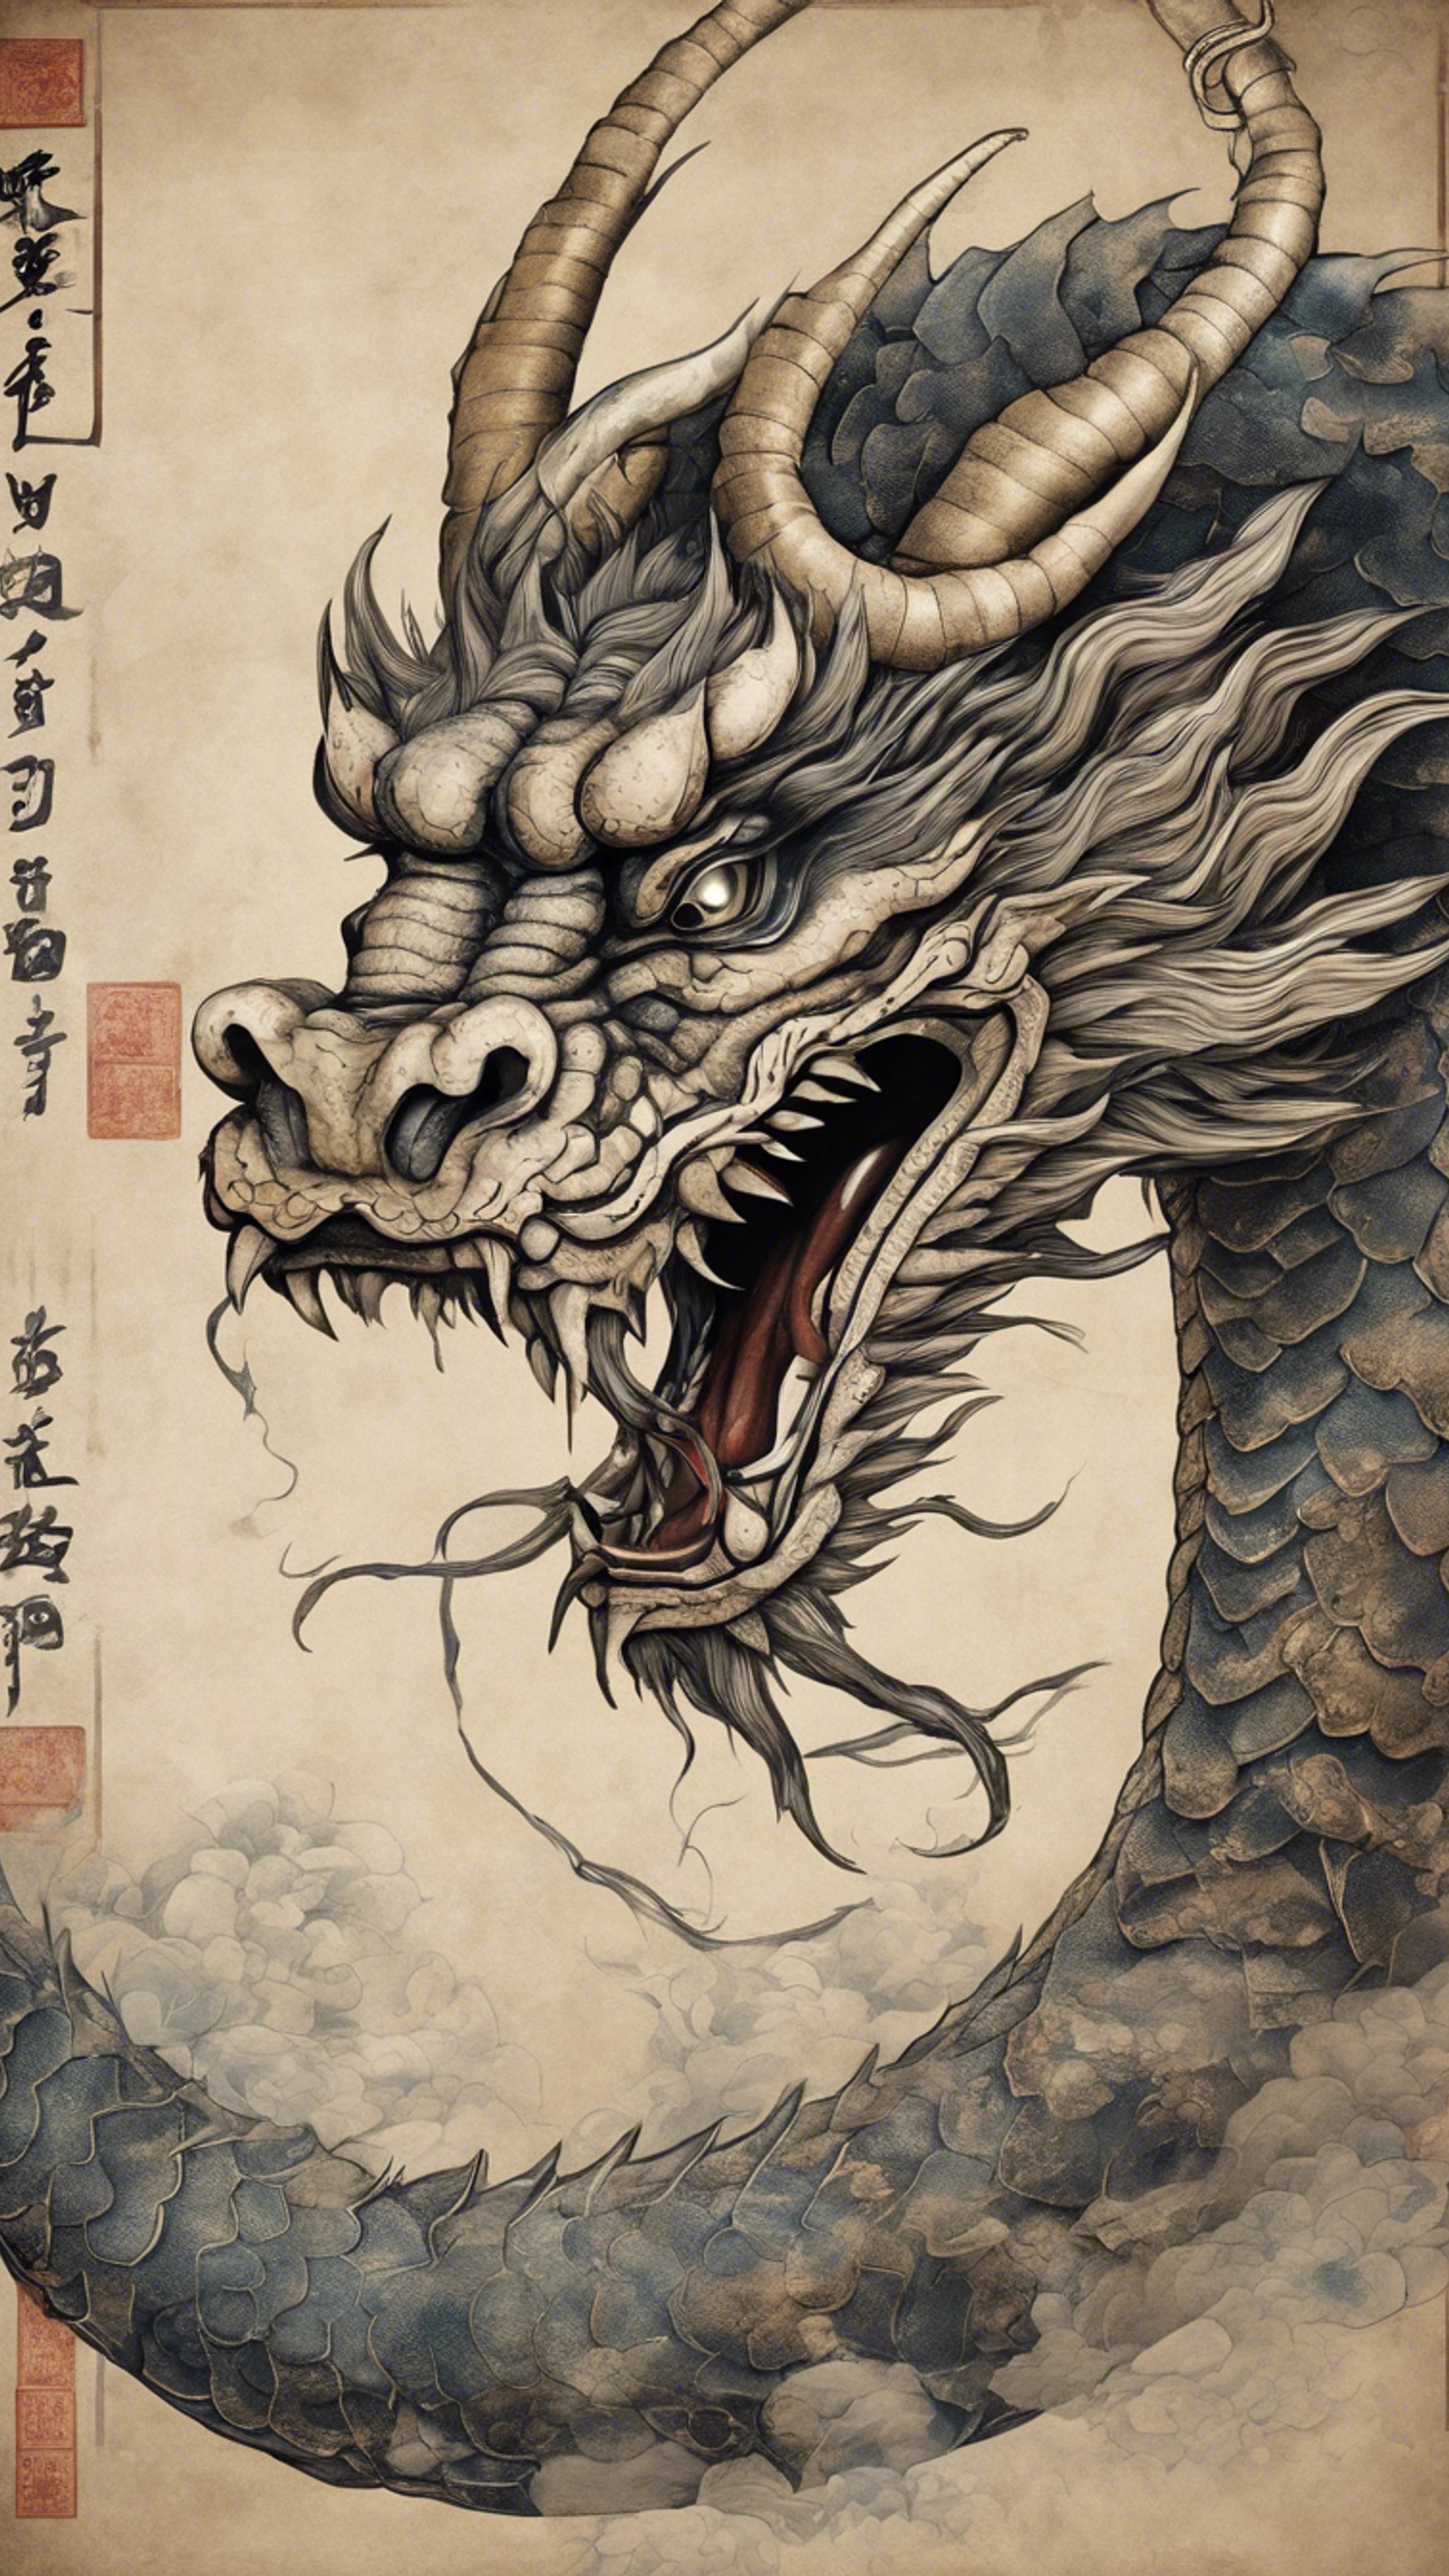 A majestic Japanese dragon illustrated in an ancient scroll. Валлпапер[ee61e4c394914154b9e3]